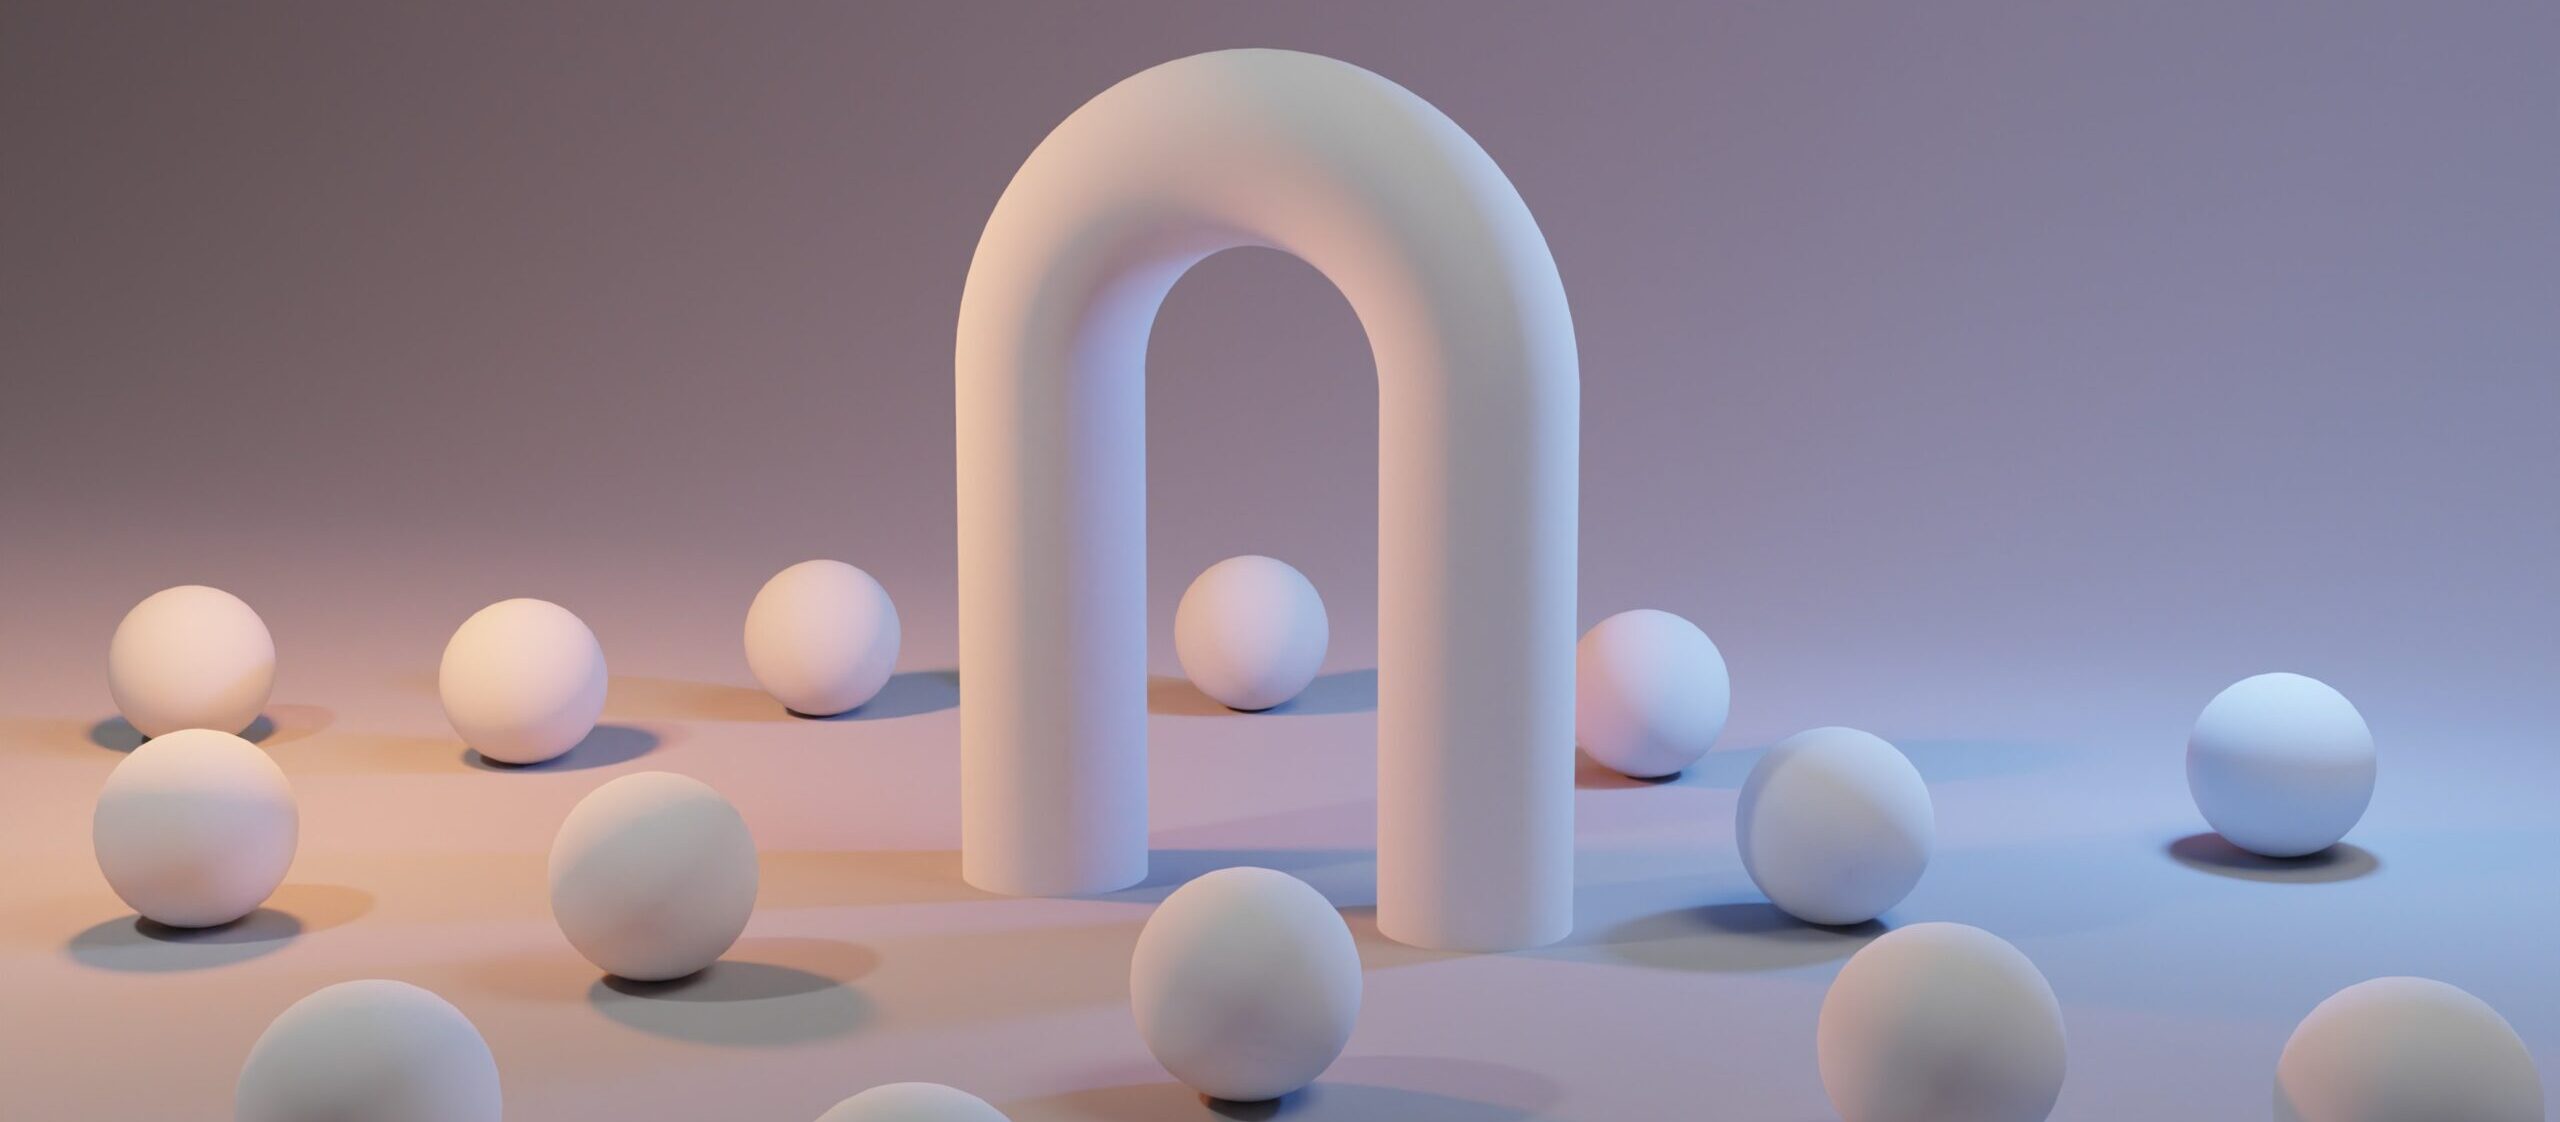 white balls on the floor and a white abstract tunnel shape